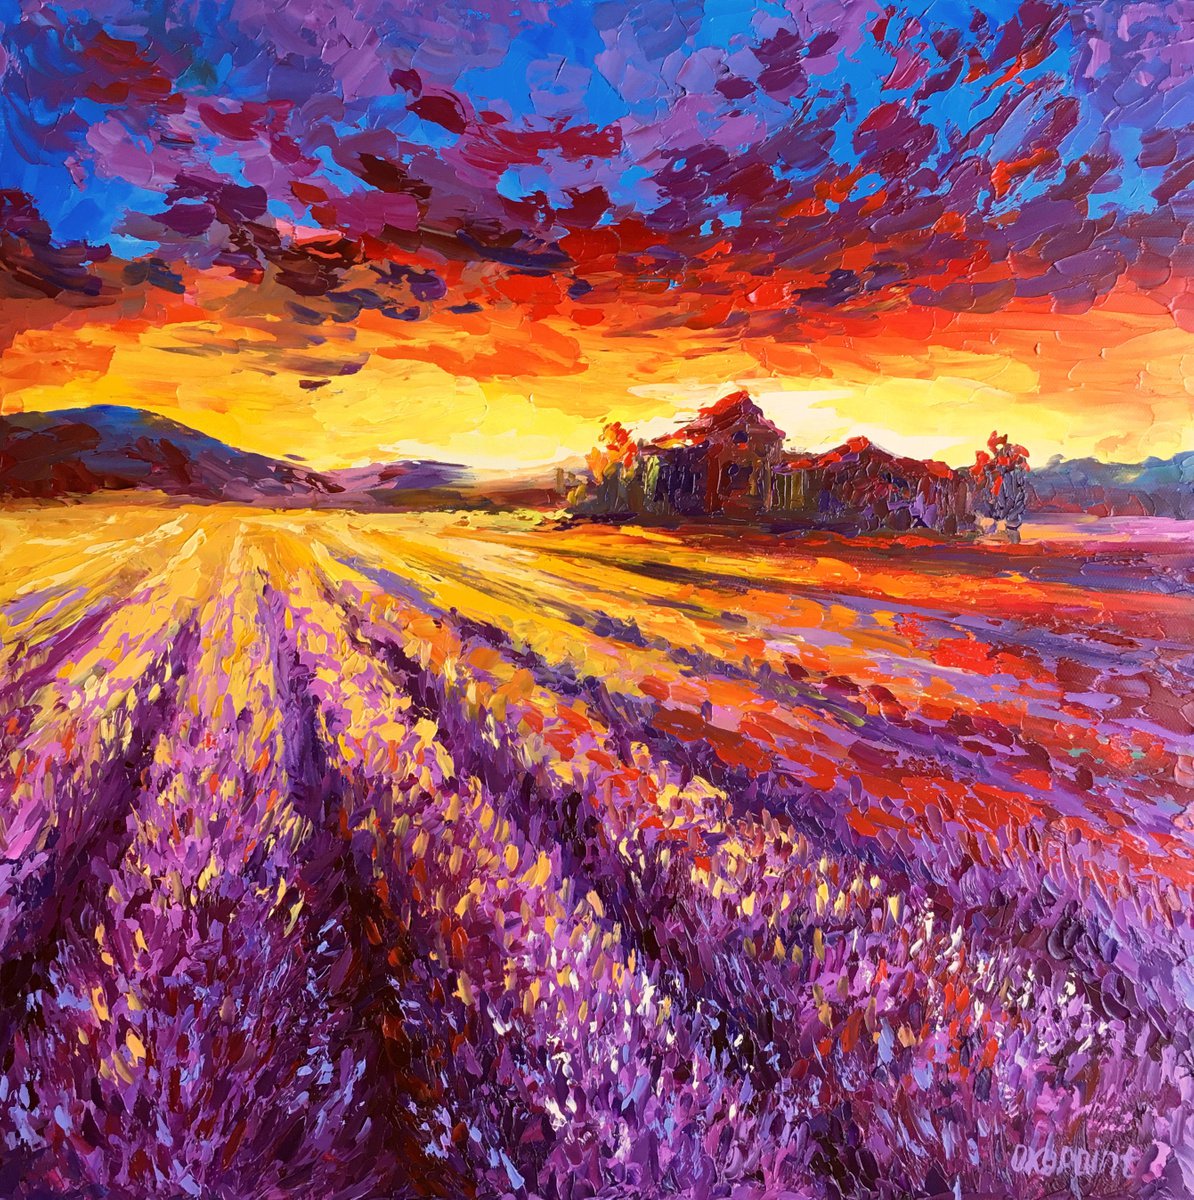 Sunset in a lavender field by OXYPOINT